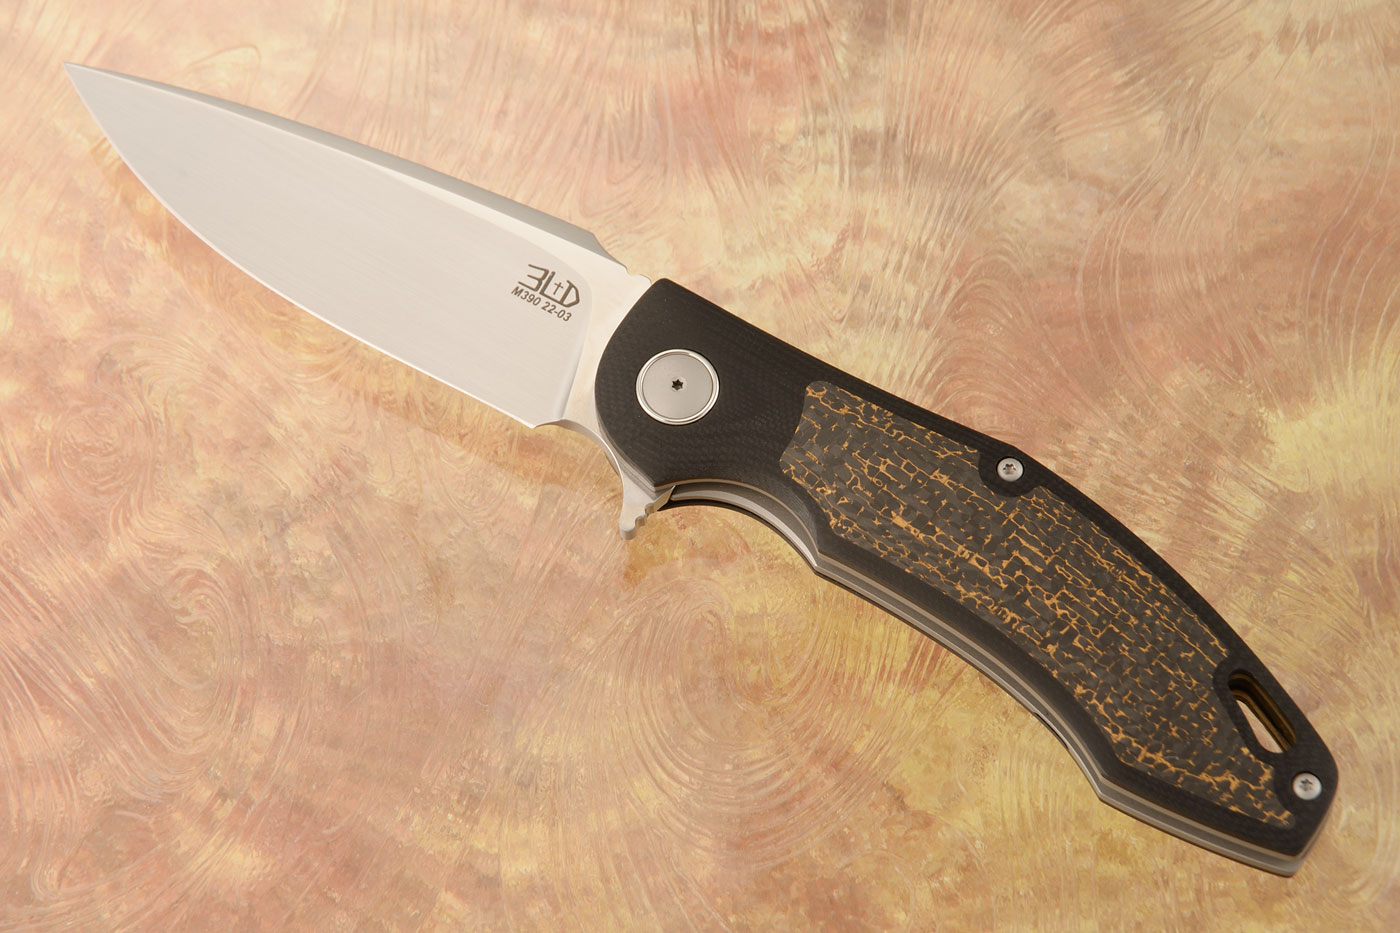 H4 Flipper with Black G10 and Copper Snakeskin FatCarbon Inlays - M390